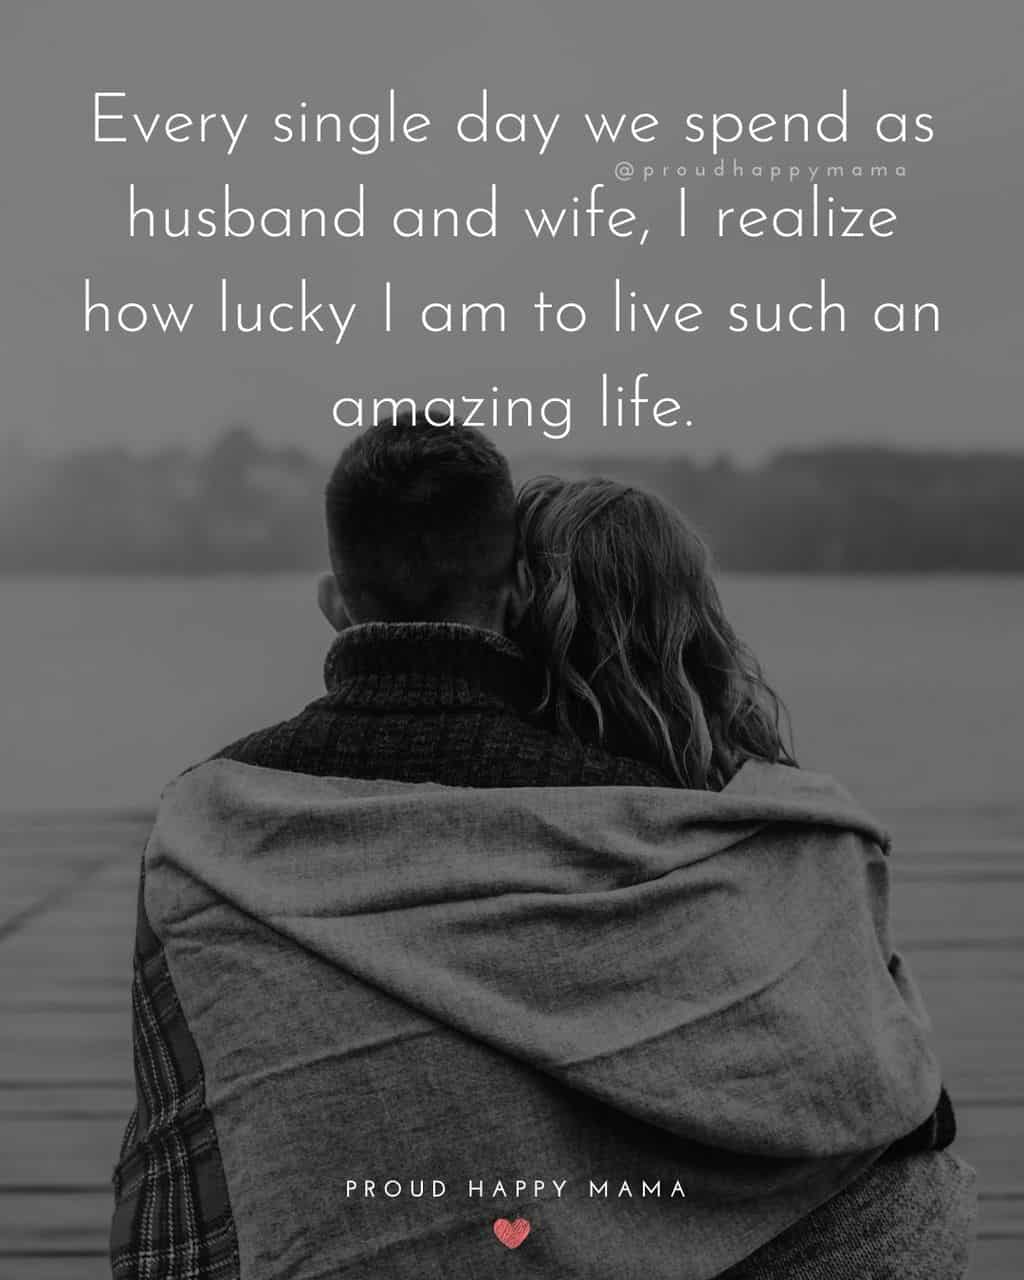 Husband And Wife Quotes - Every single day we spend as husband and wife, I realize how lucky I am to live such an amazing life.